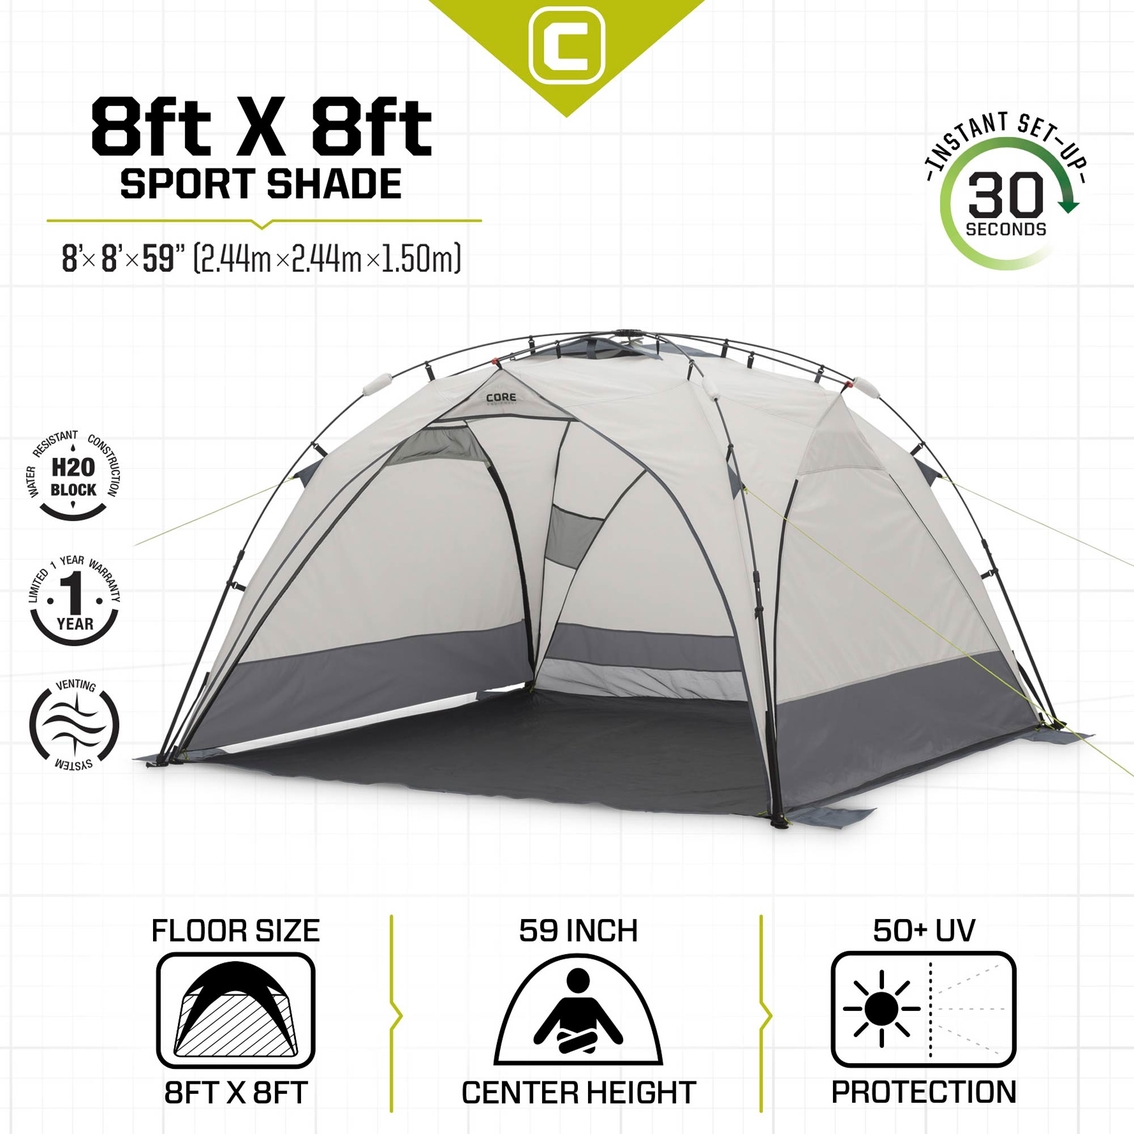 Core Equipment 8 x 8 ft. Instant Sport Shade - Image 5 of 10